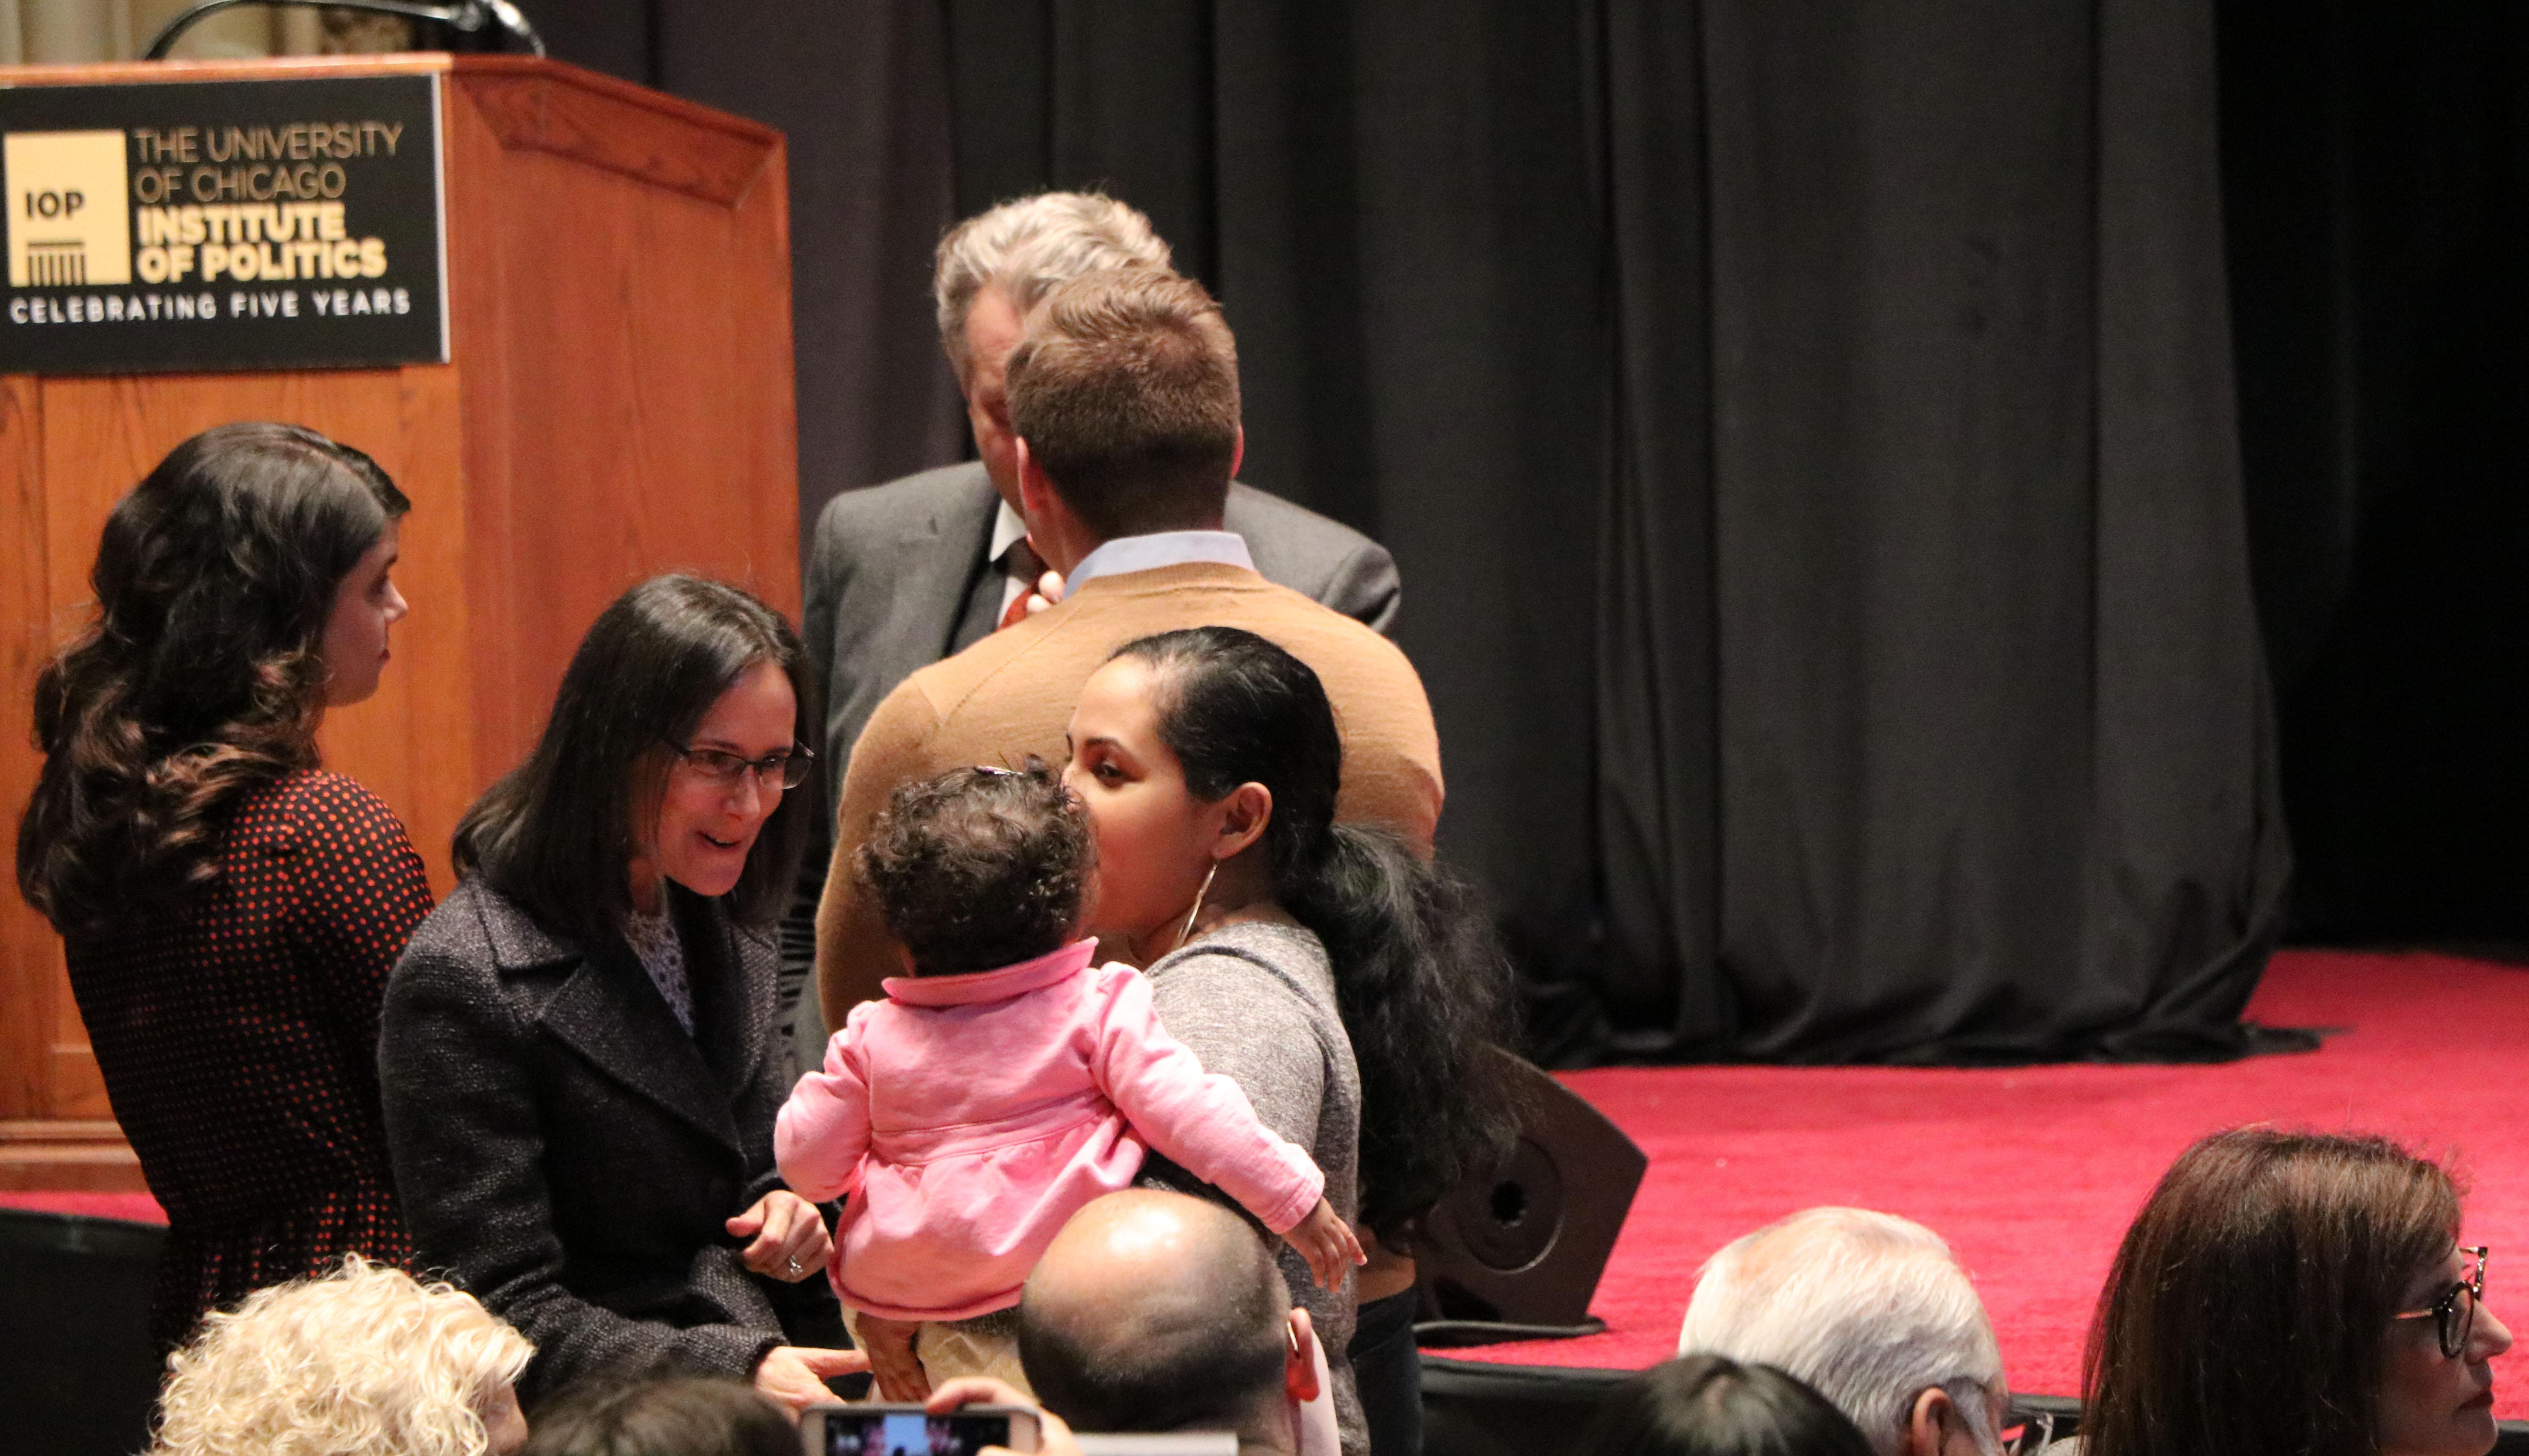 Illinois Attorney General Lisa Madigan, who will not seek reelection this year, speaks to an attendee's young child before the start of Wednesday's event. (Evan Garcia / Chicago Tonight)